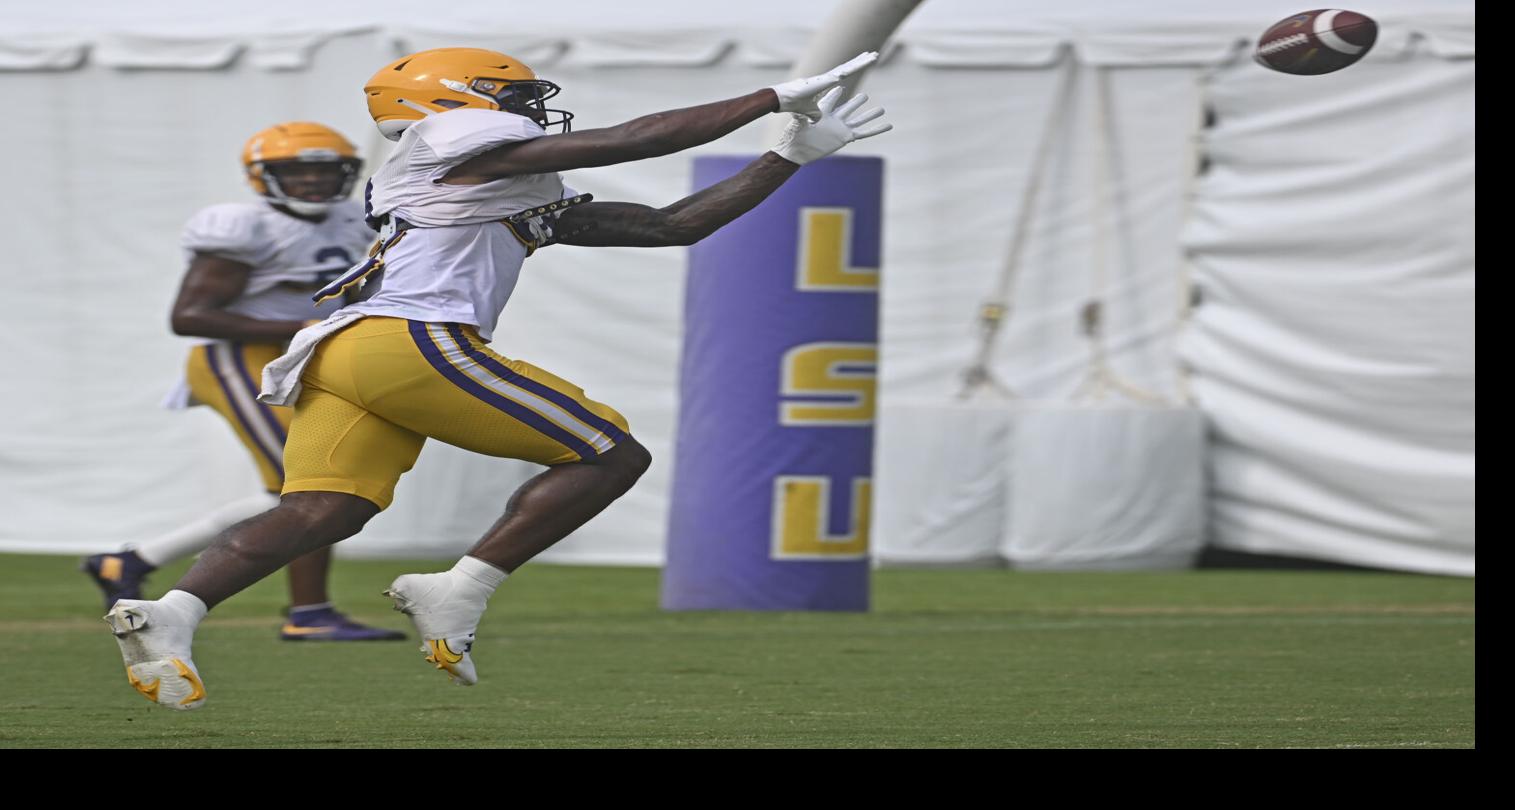 Malik Nabers moves to slot receiver as one of LSU's most dynamic wide